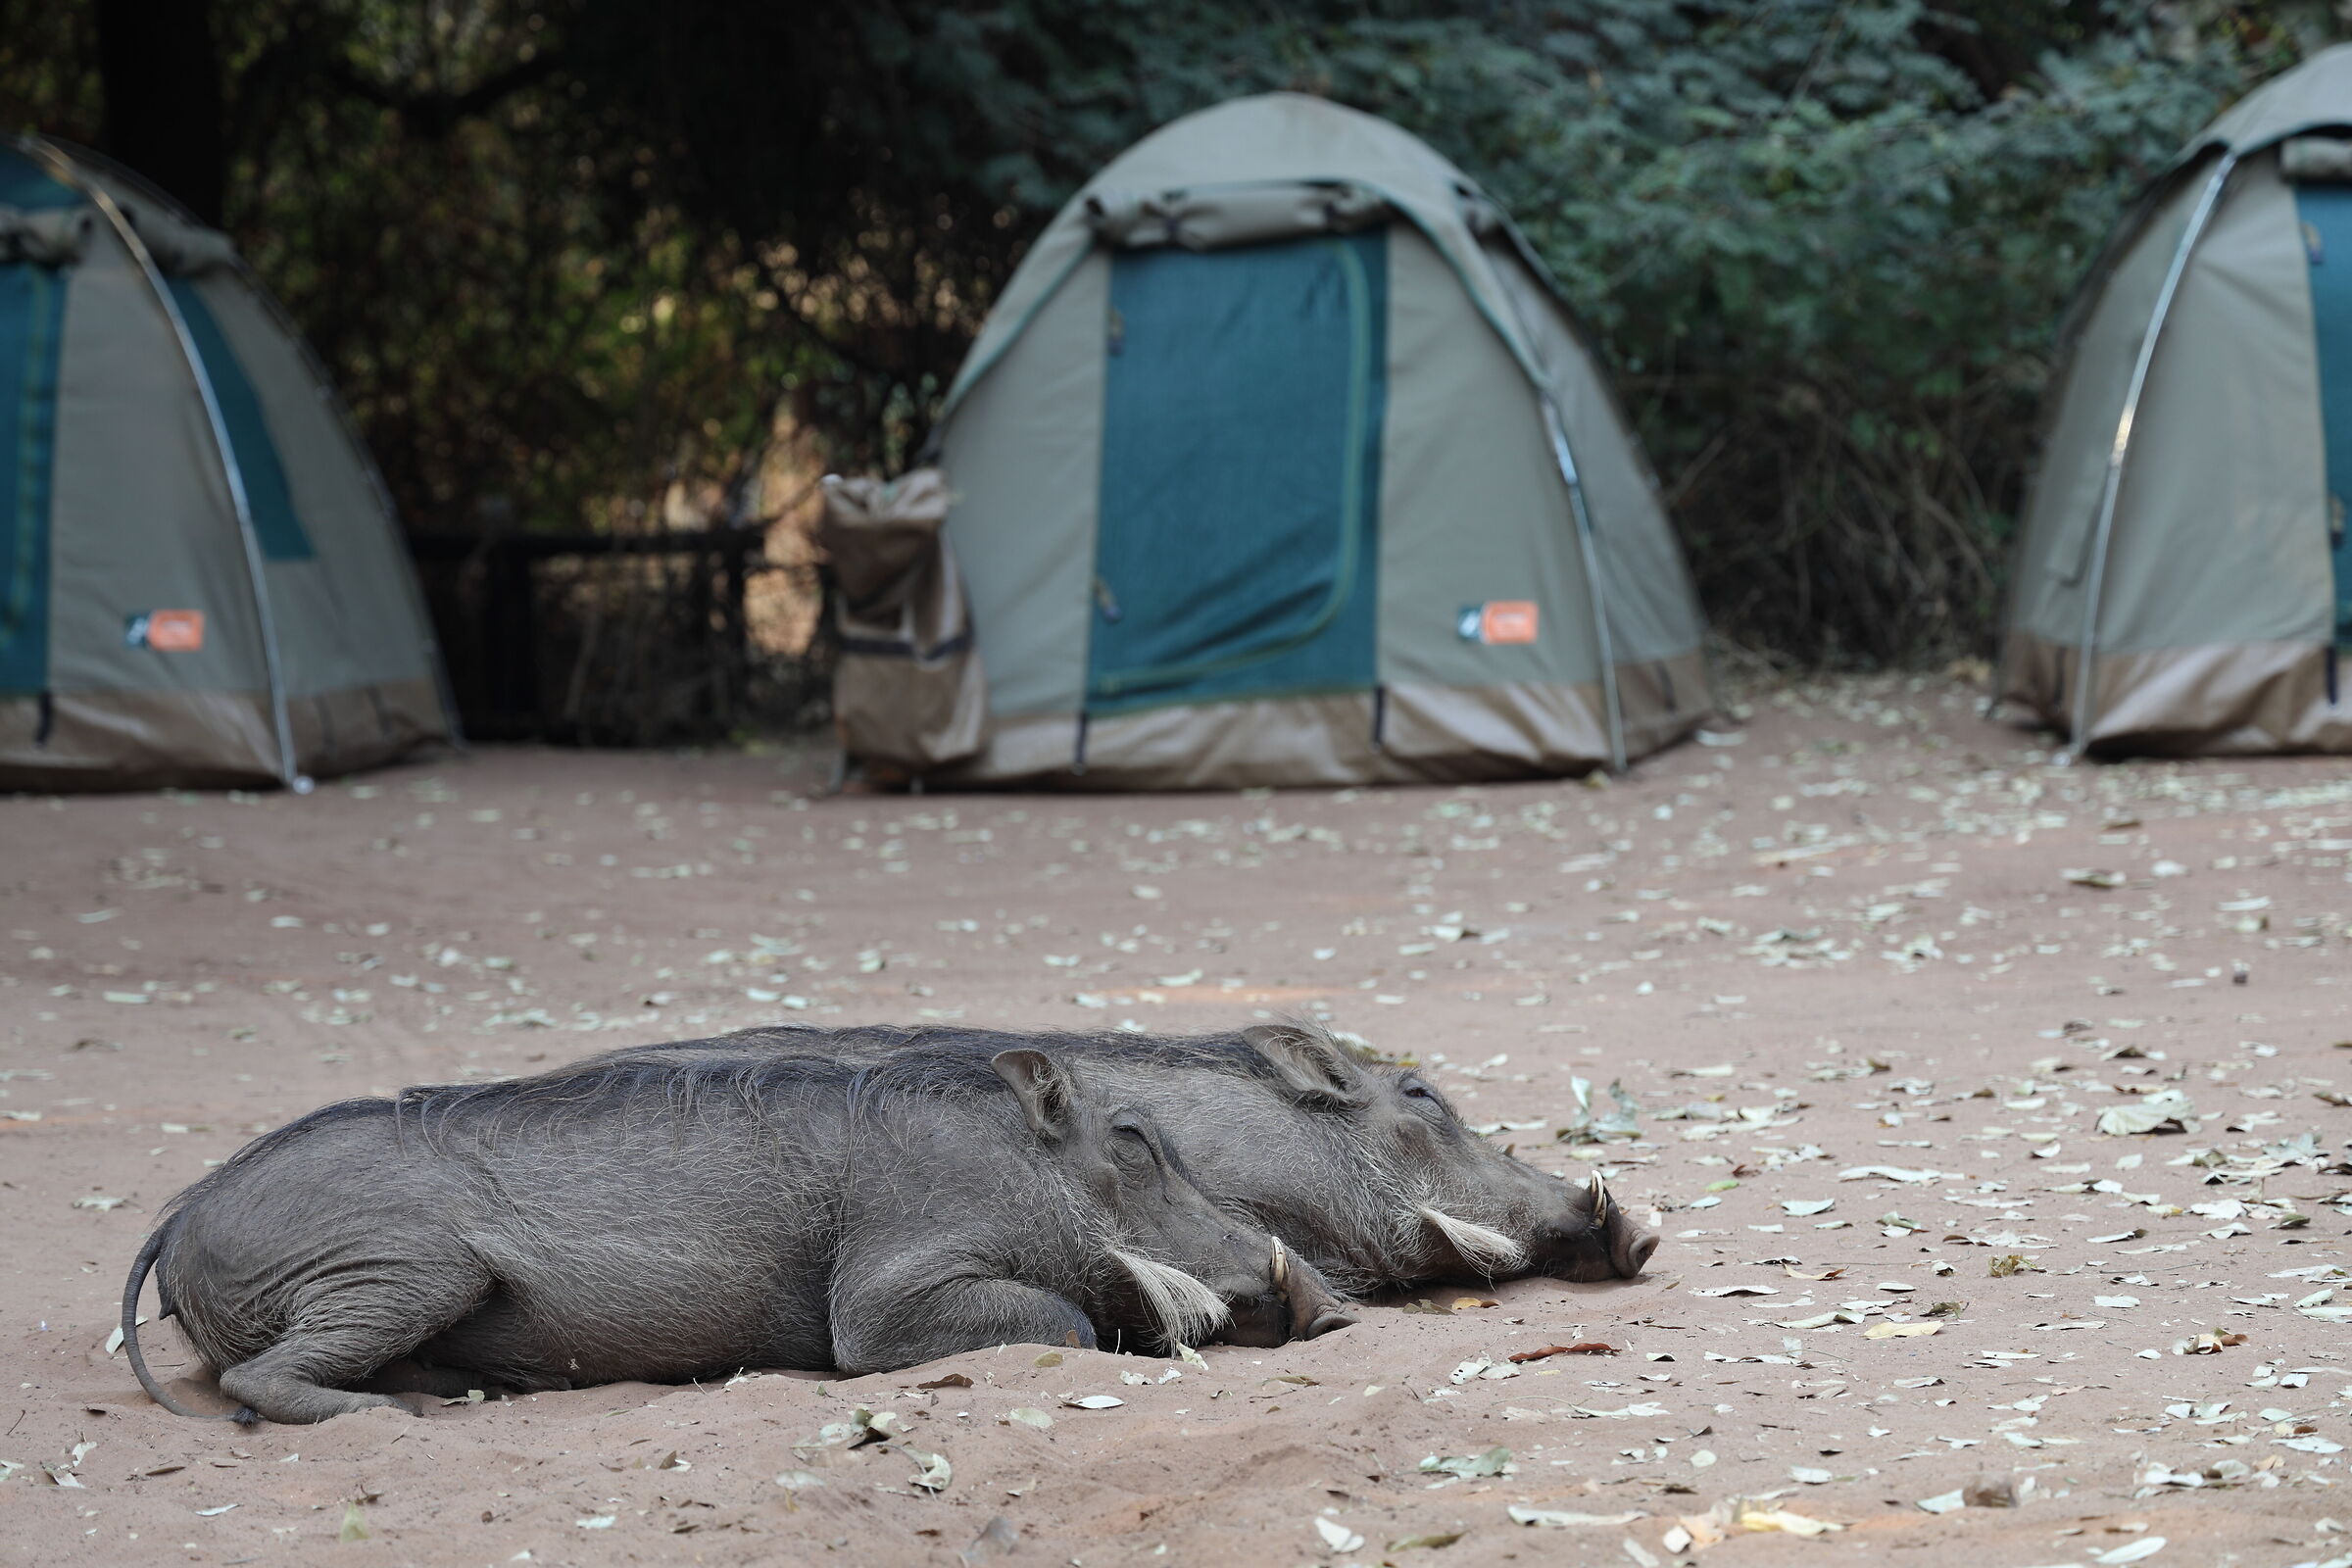 Botswana - Warthogs in freedom in the campsite...